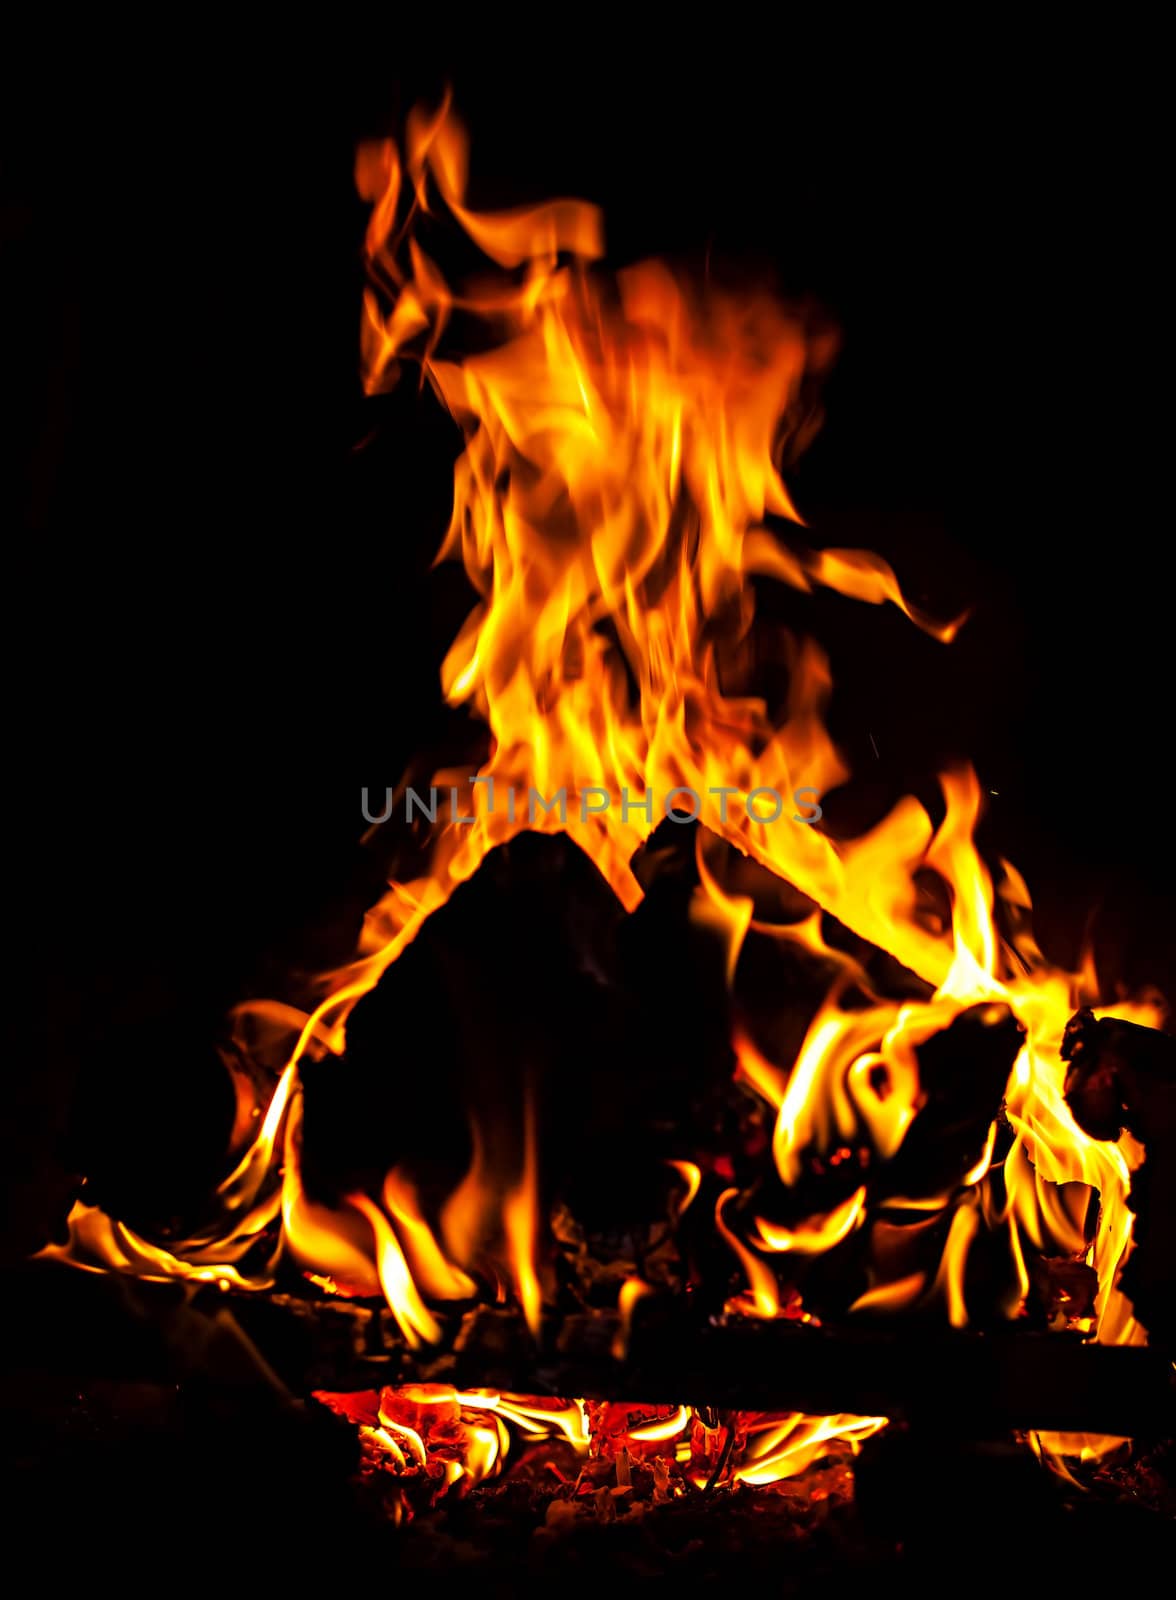 The fire in the furnace. Flames on black background